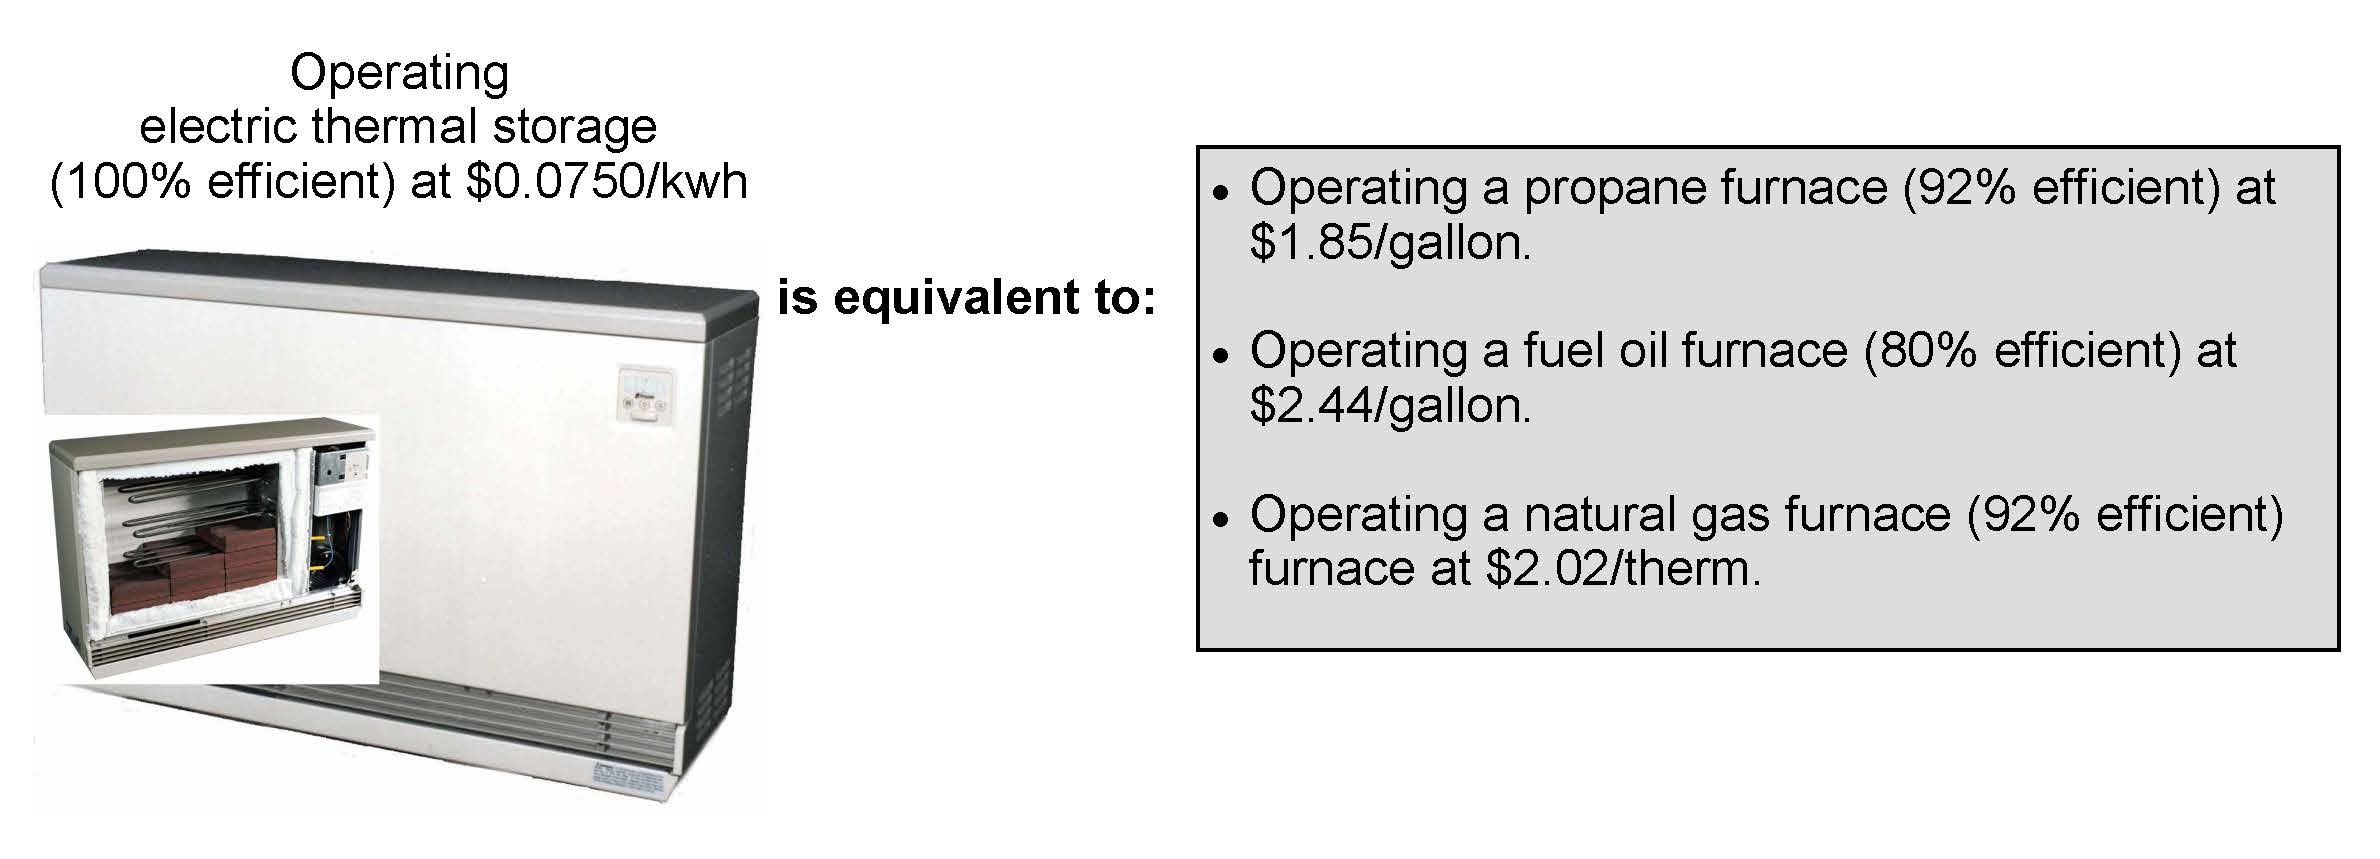 ETS unit heating cost compared to fossil fuel sources.